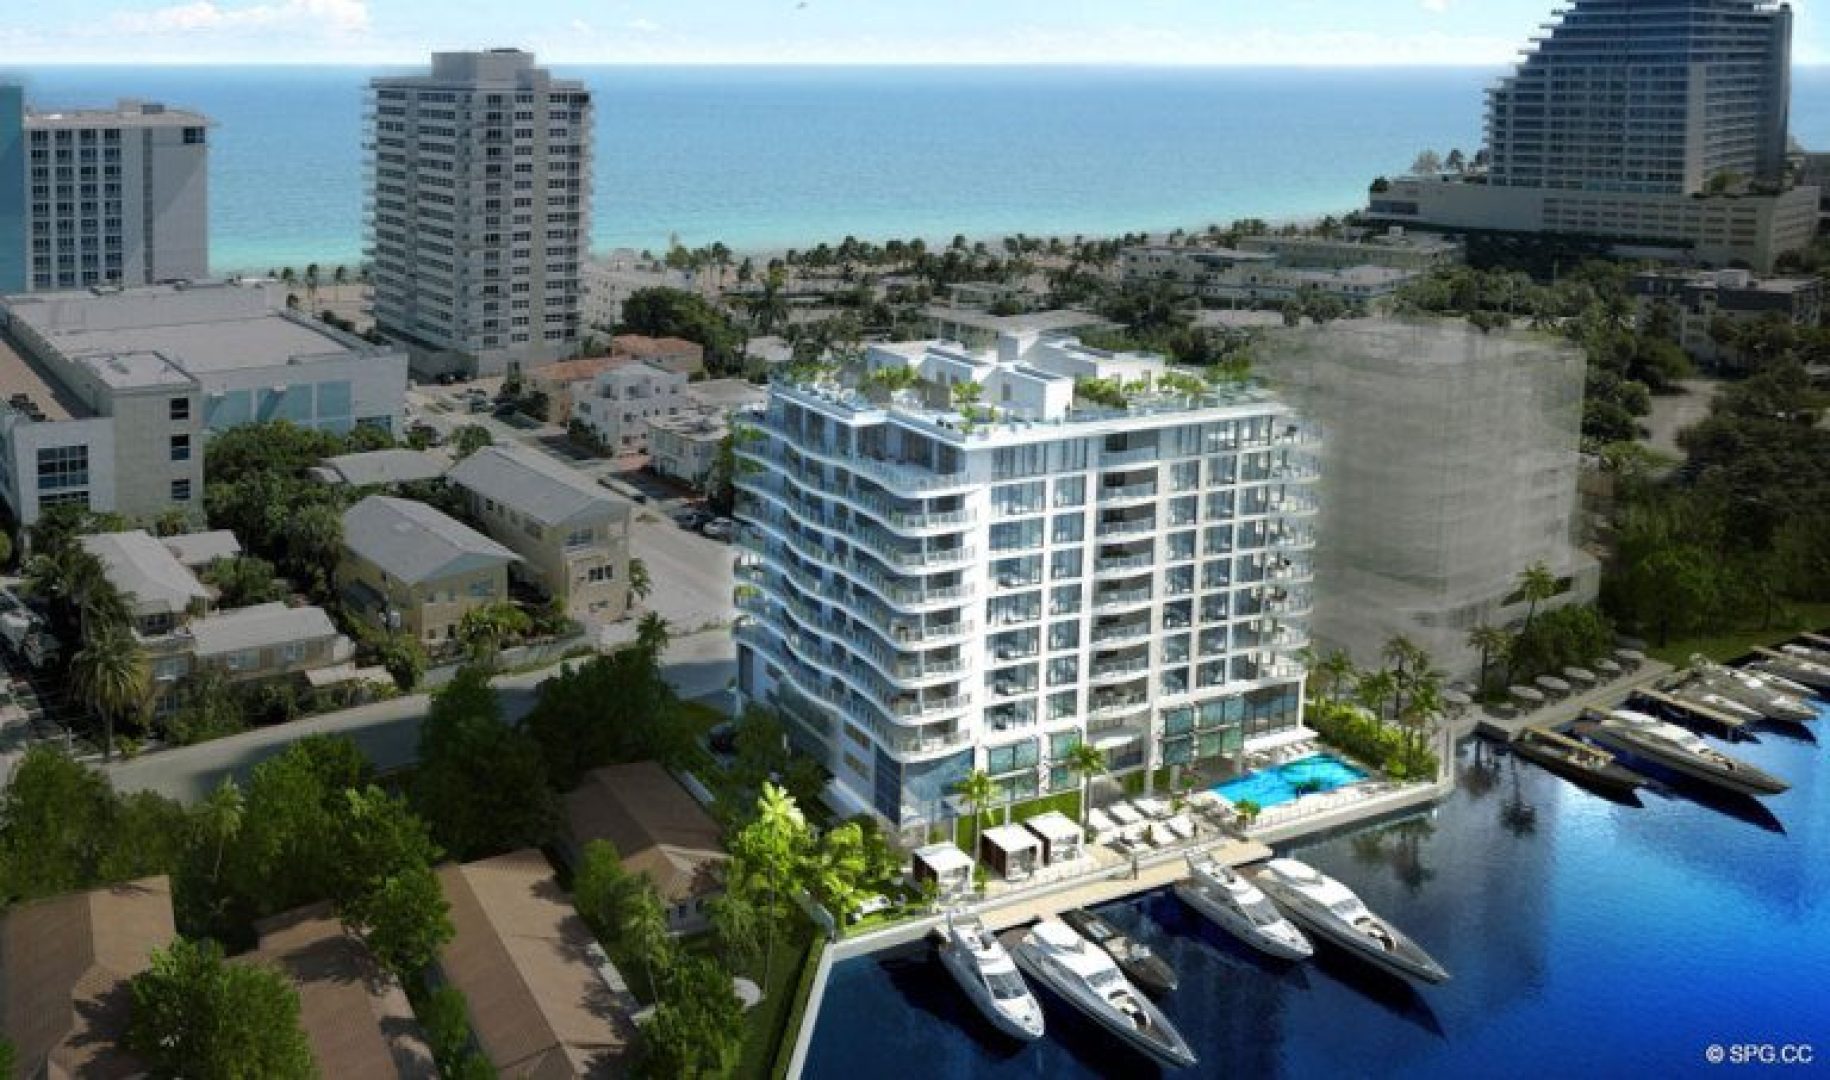 Aerial View of 321 at Water's Edge, Luxury Waterfront Condos in Fort Lauderdale, Florida 33304